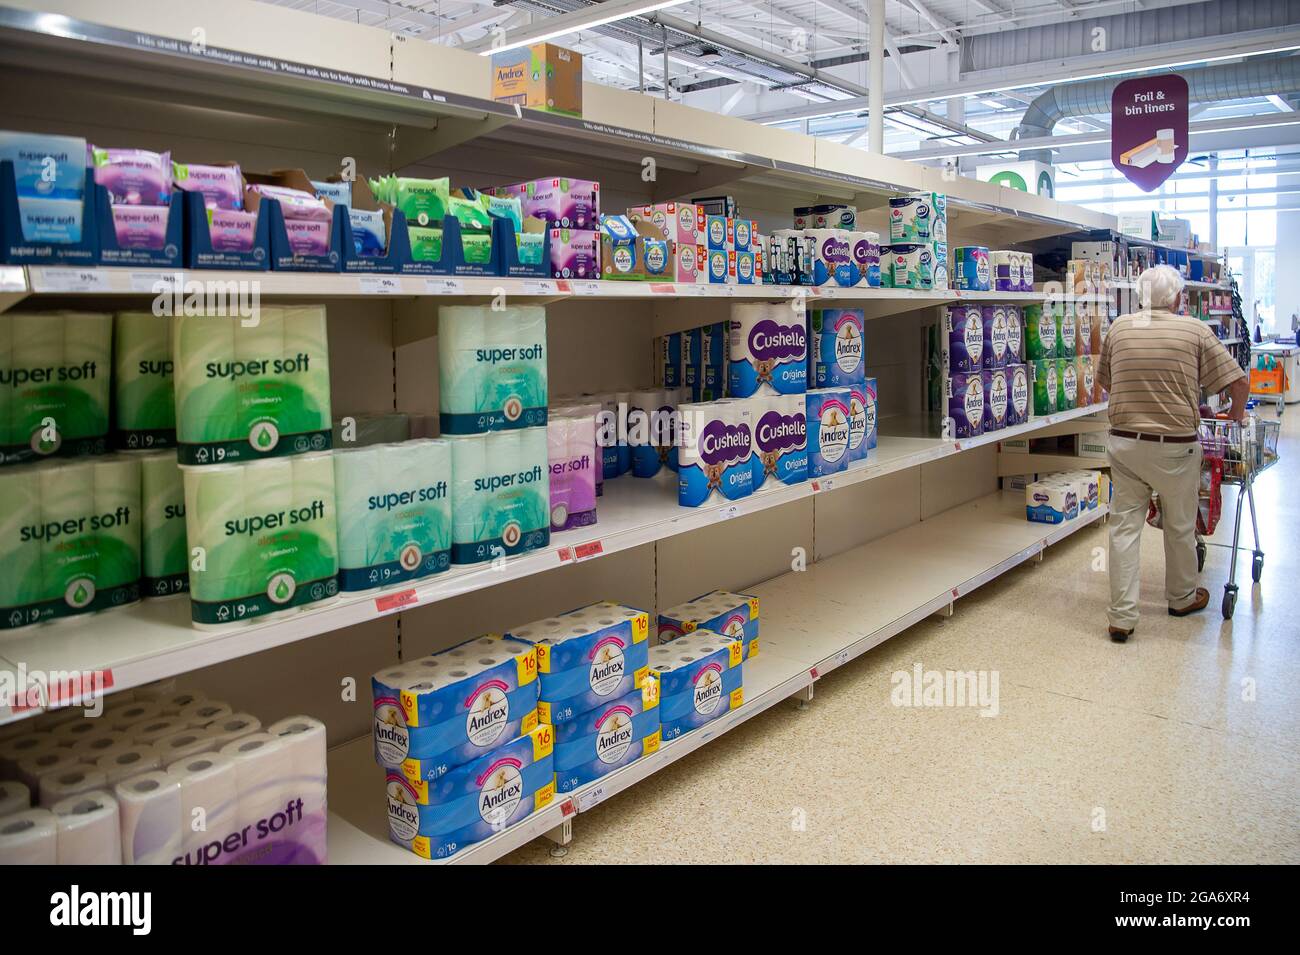 Taplow, Buckinghamshire, UK. 29th July, 2021. Some customers have been panic buying toilet rolls again leaving some gaps in the shelves, however, Sainsbury's Supermarket in Taplow was well stocked this morning. There are some supply chain issues in general with supermarkets due to HGV lorry driver shortages as well as supply chain production staff having to self isolate due to having been pinged by the Covid-19 NHS Track and Trace app. Credit: Maureen McLean/Alamy Live News Stock Photo